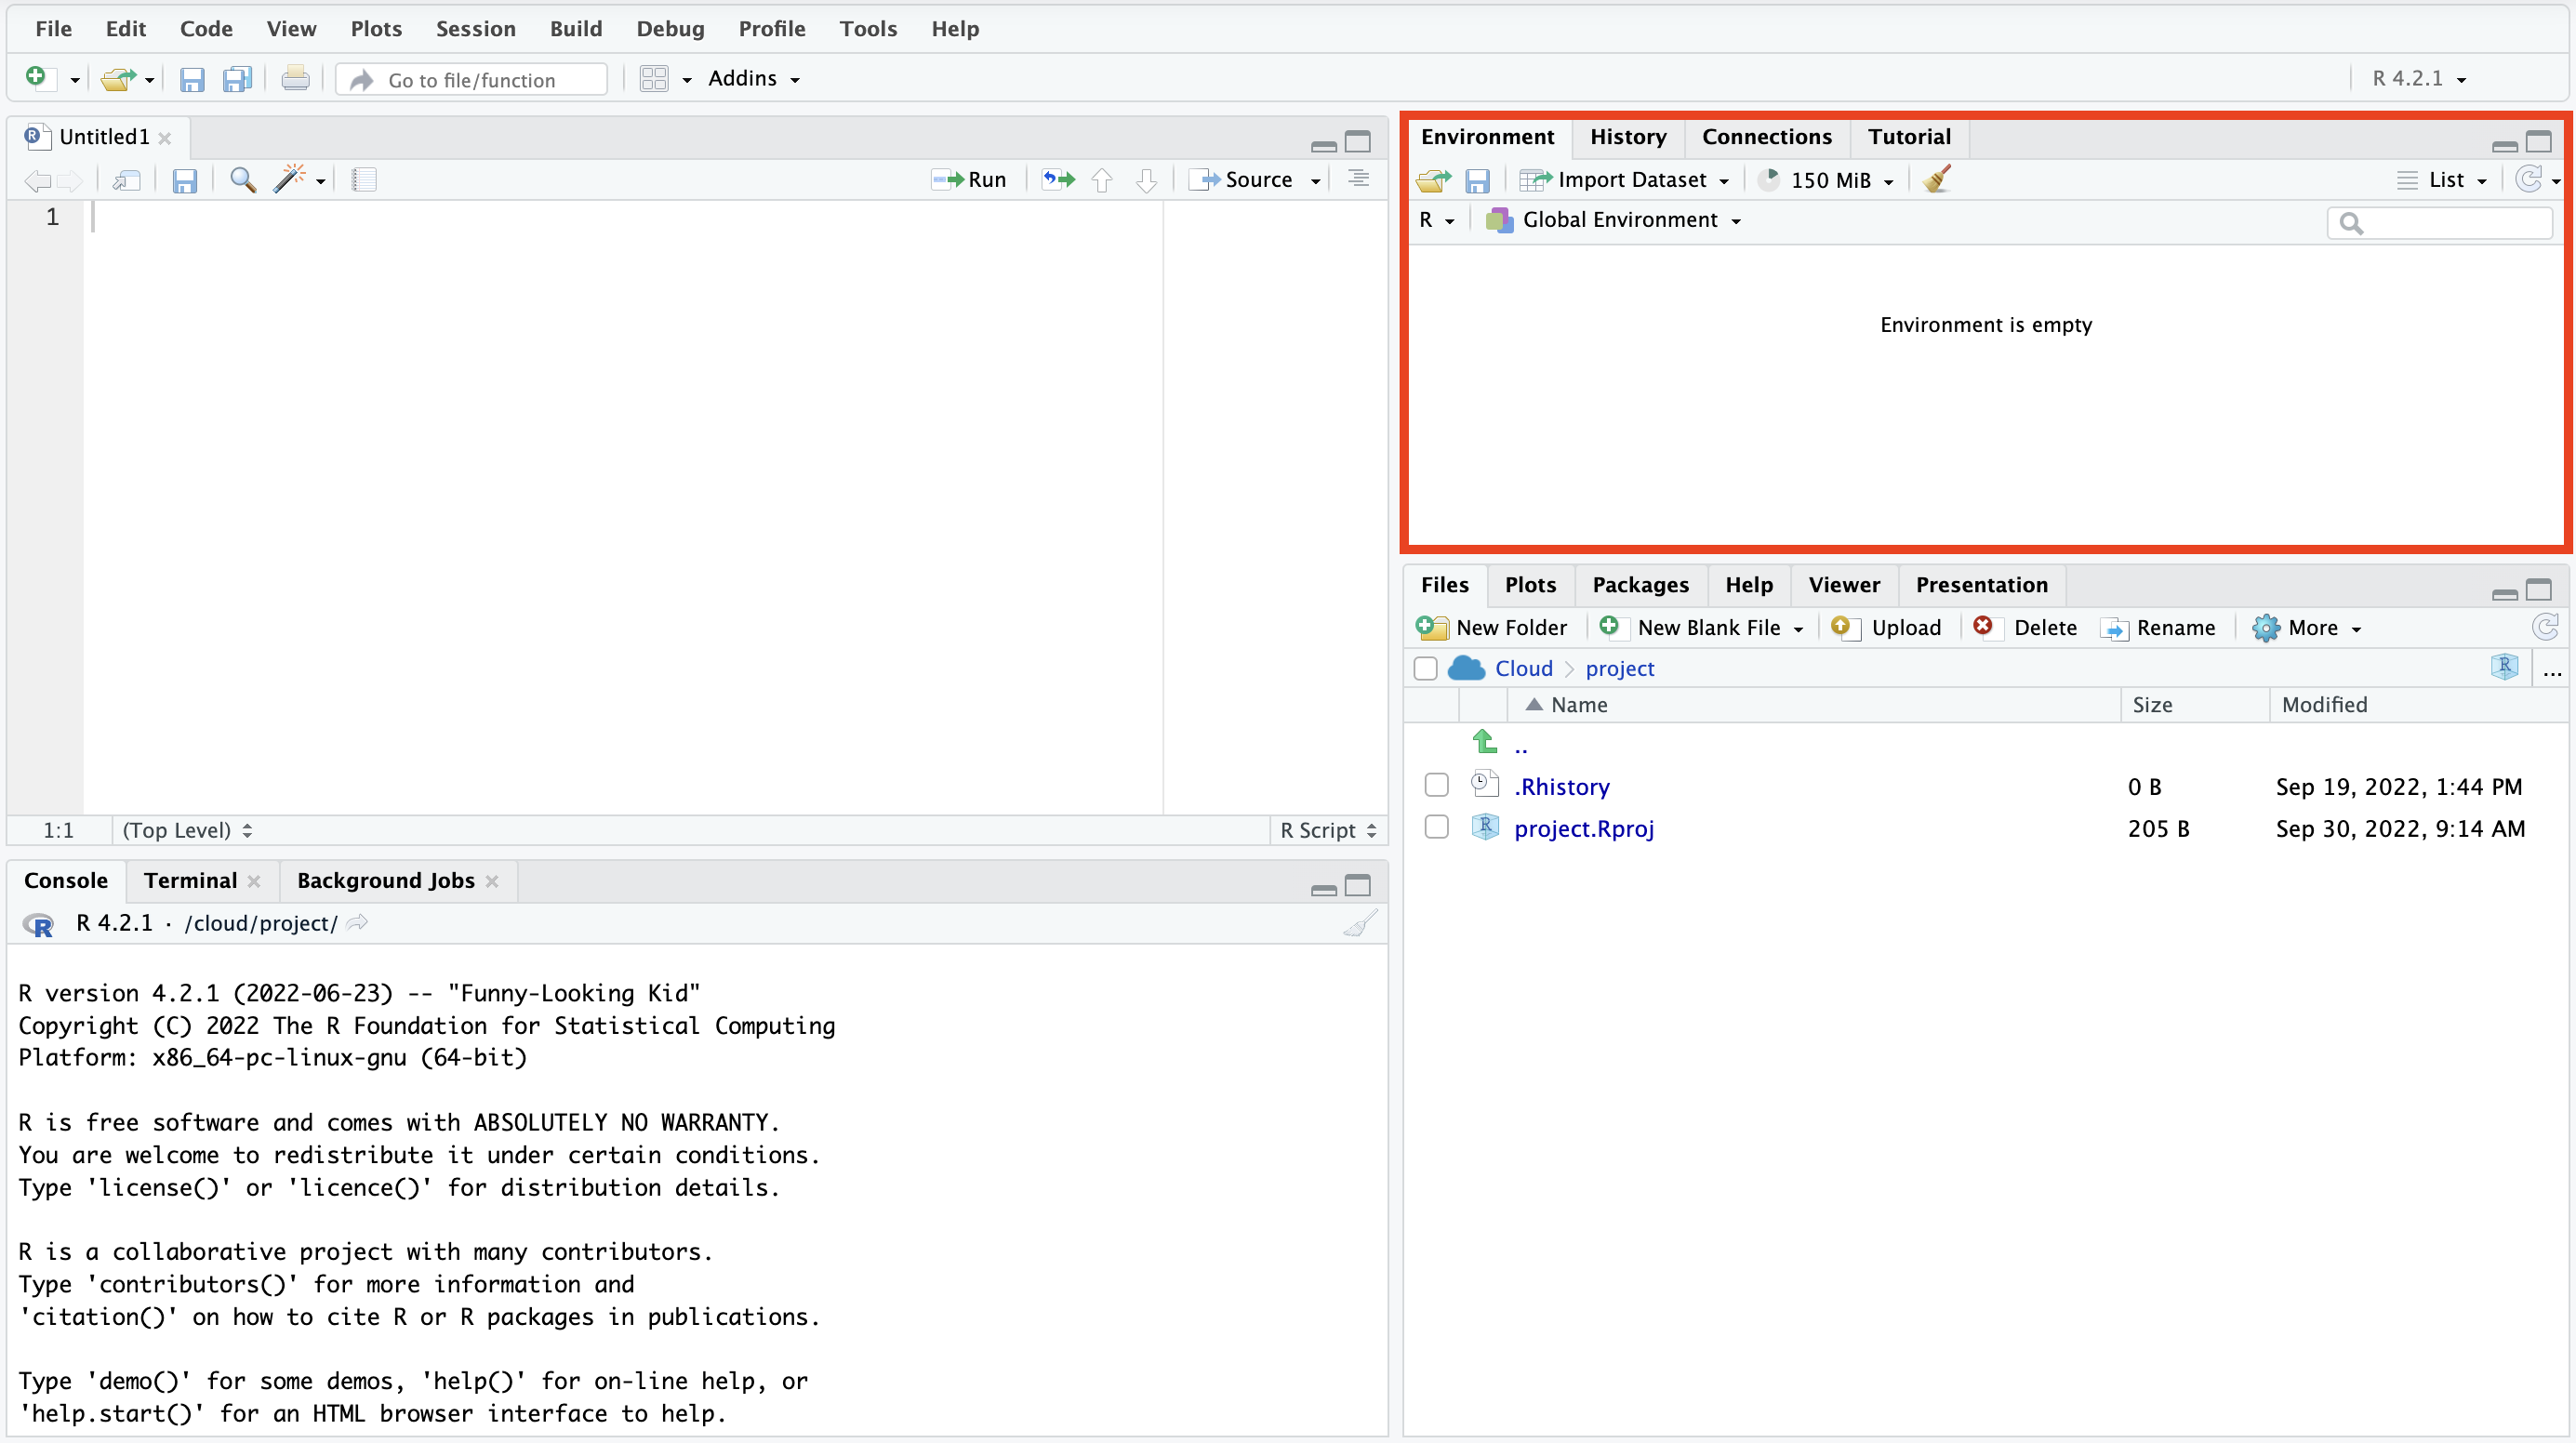 The RStudio interface with the environment pane highlighted in red